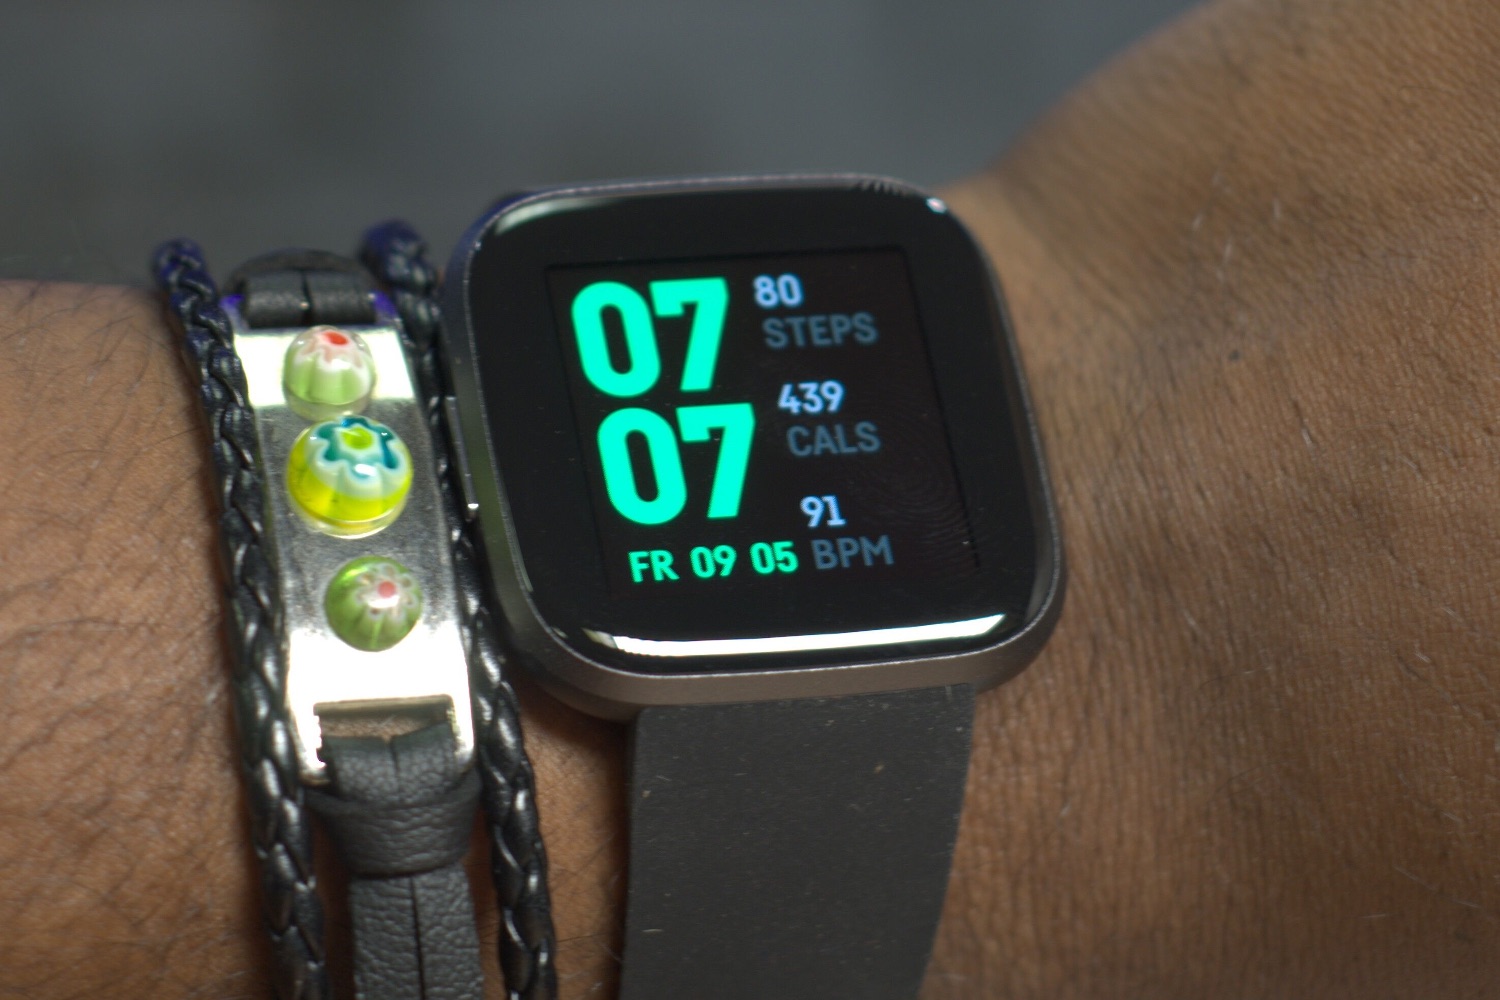 Band Transformation: Changing The Band On Your Fitbit Versa 2